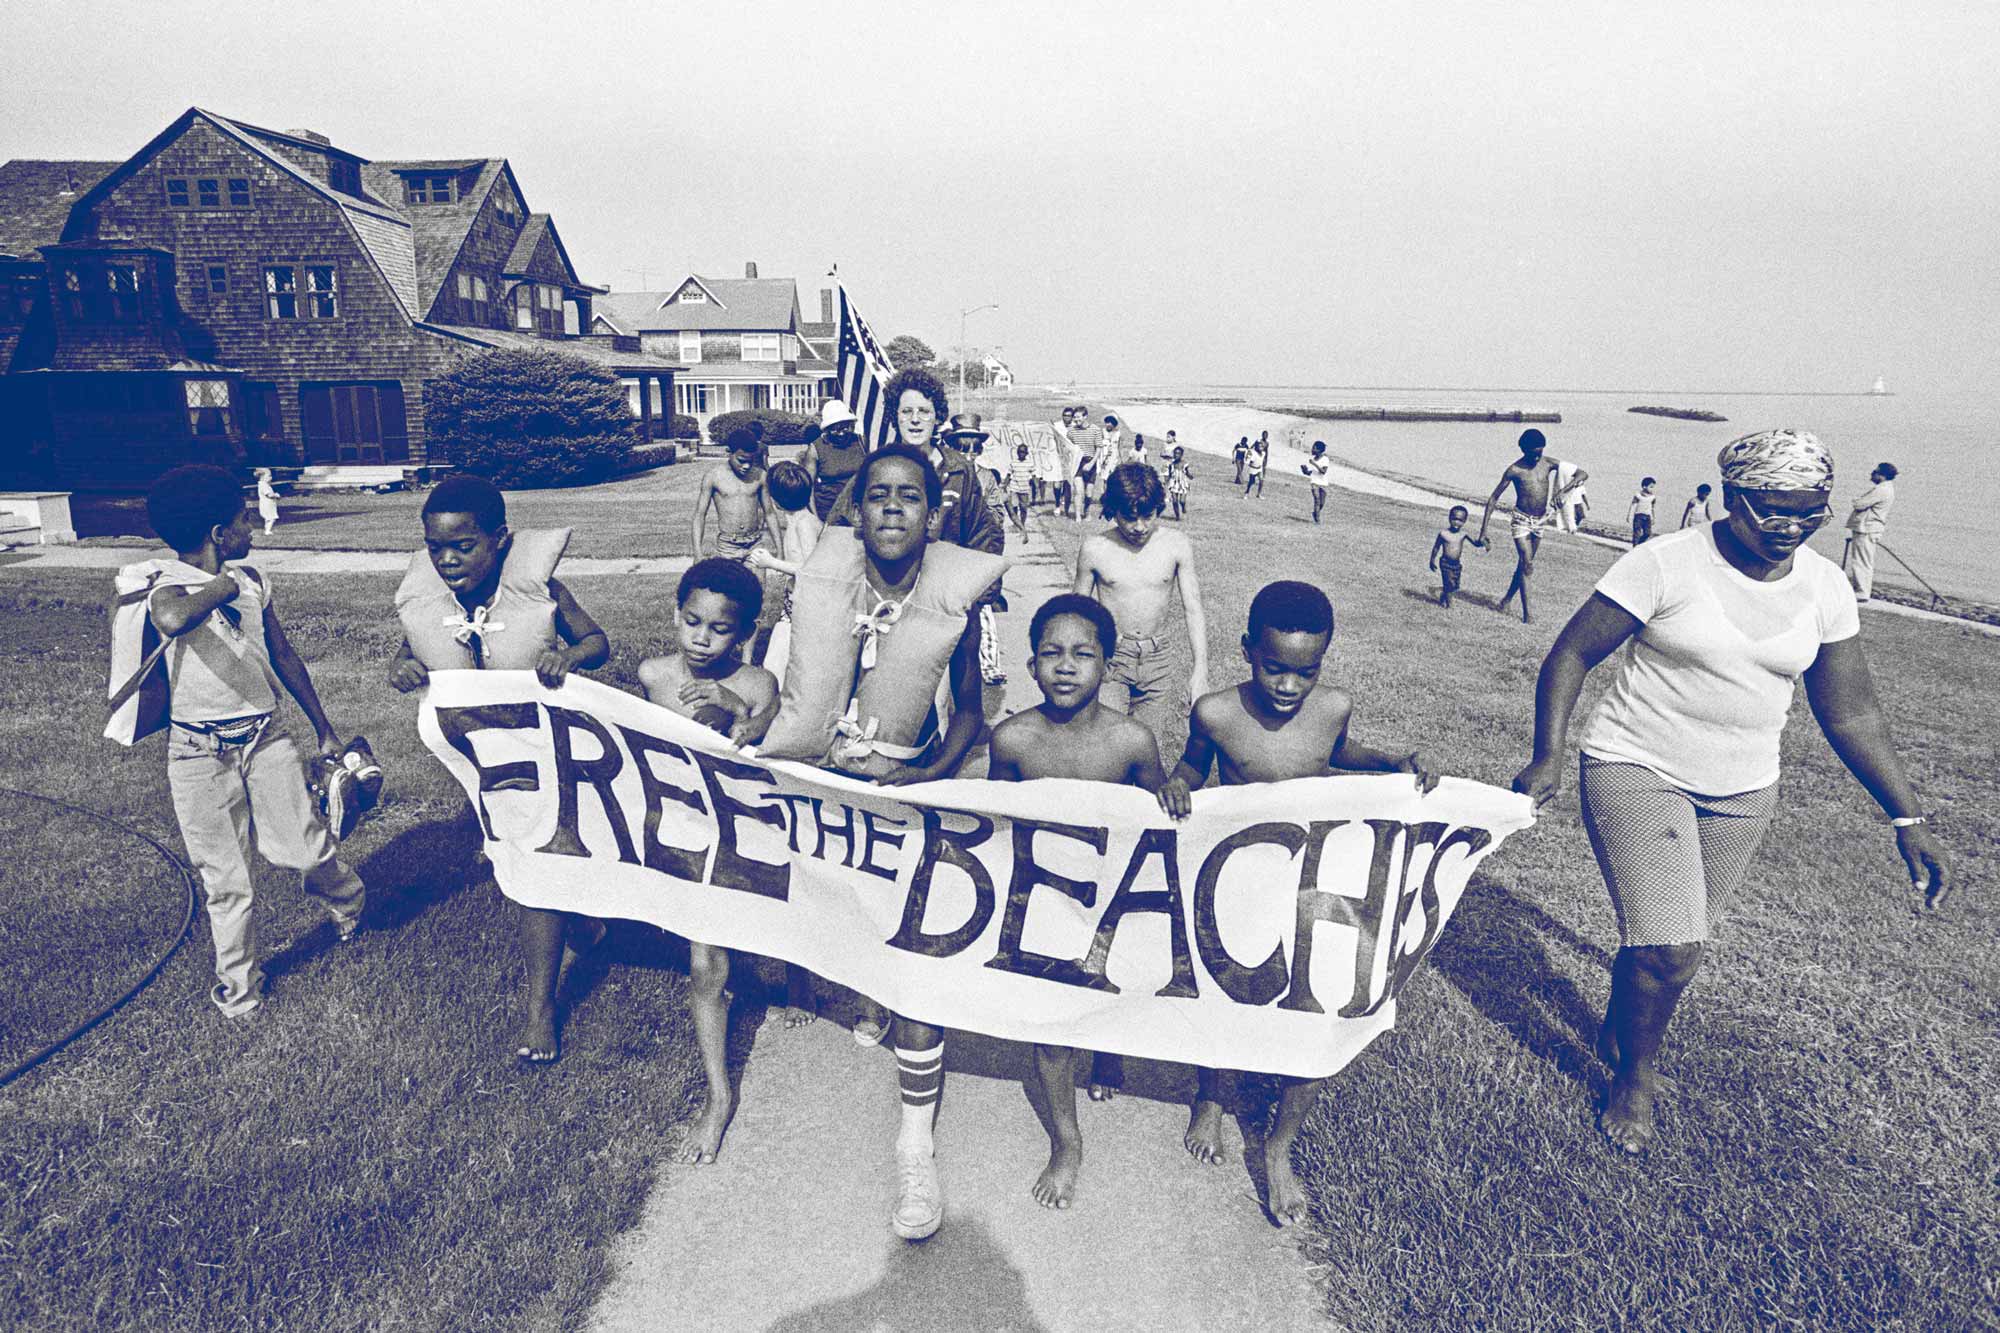 Parents and children hold a sign that says Free the Beaches